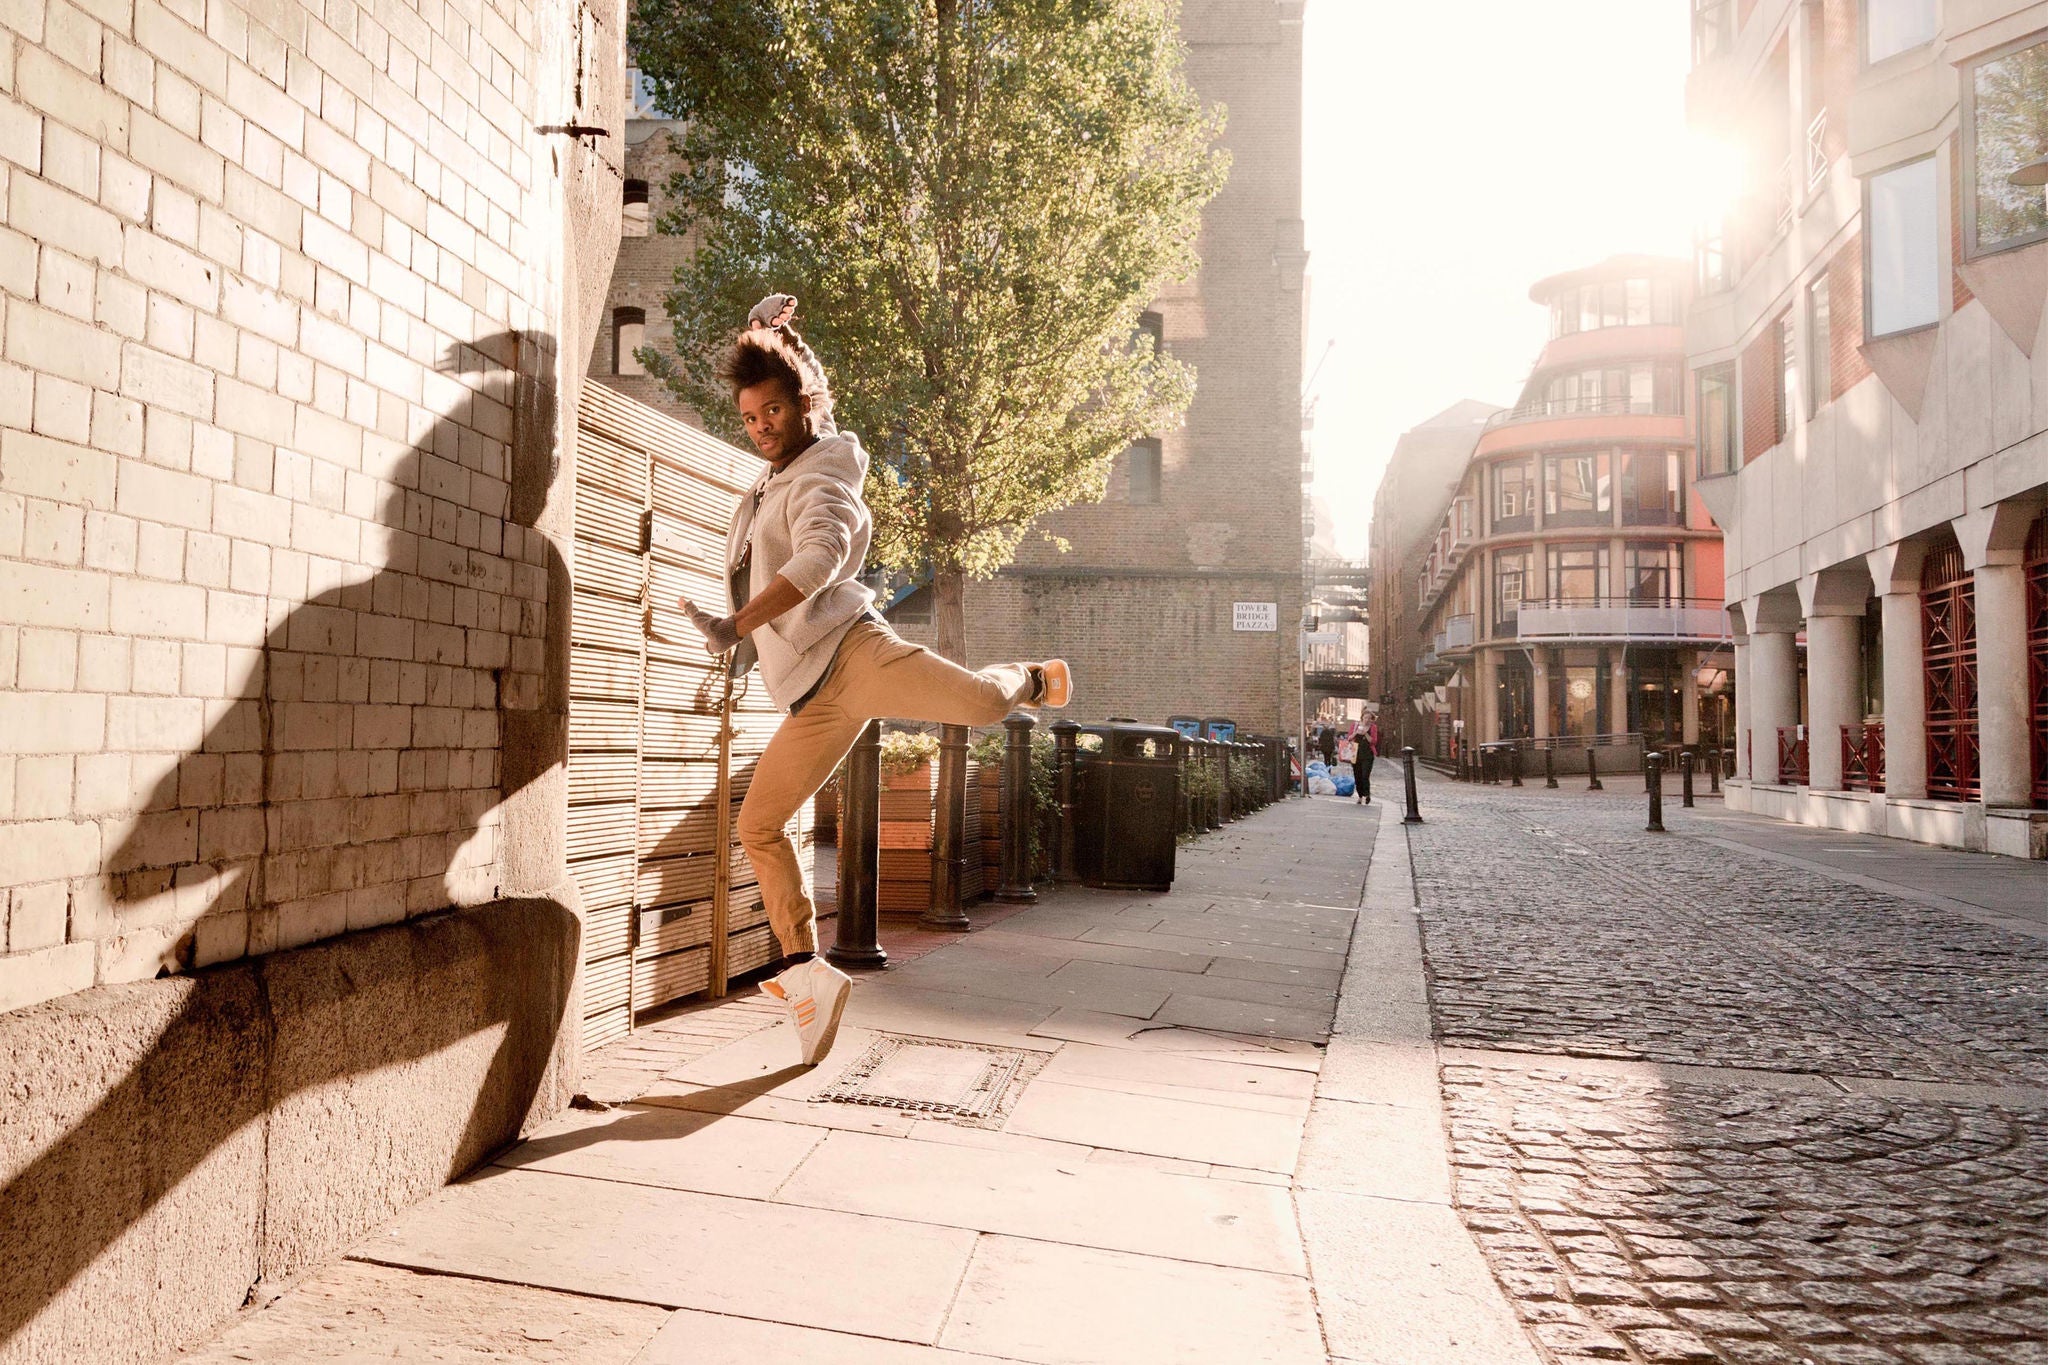 Young man at morning light shines on street dancer creating striking shadow on wall.